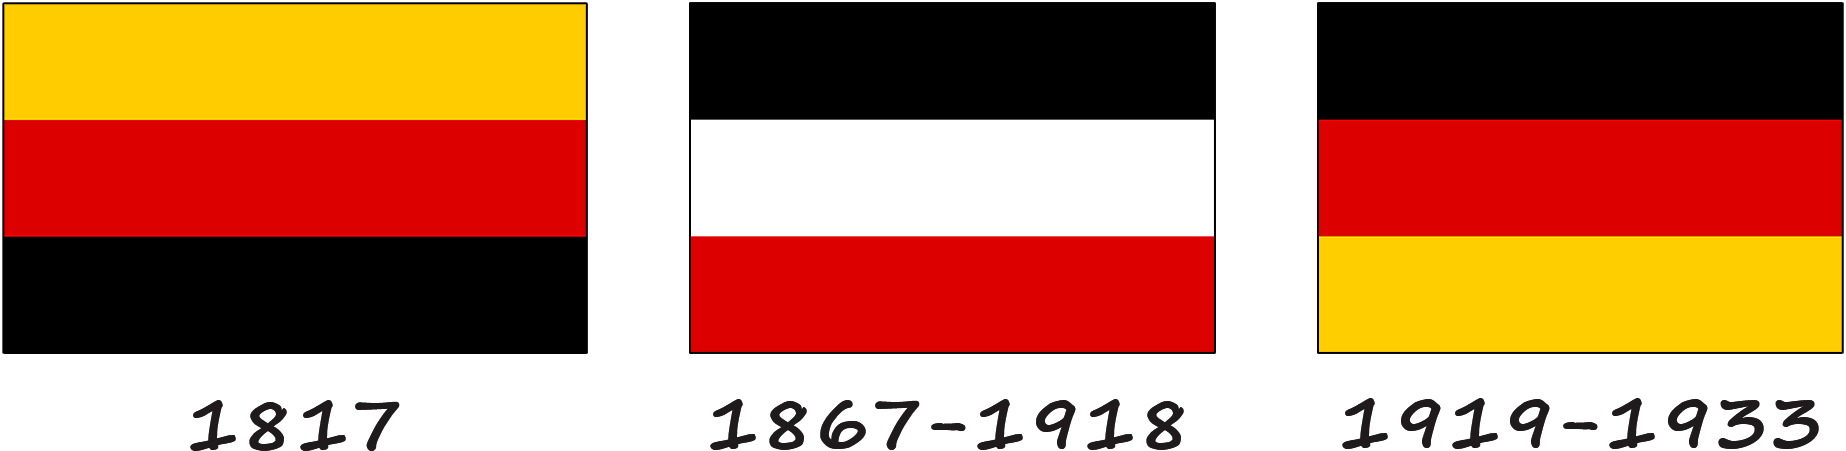 History of the German flag